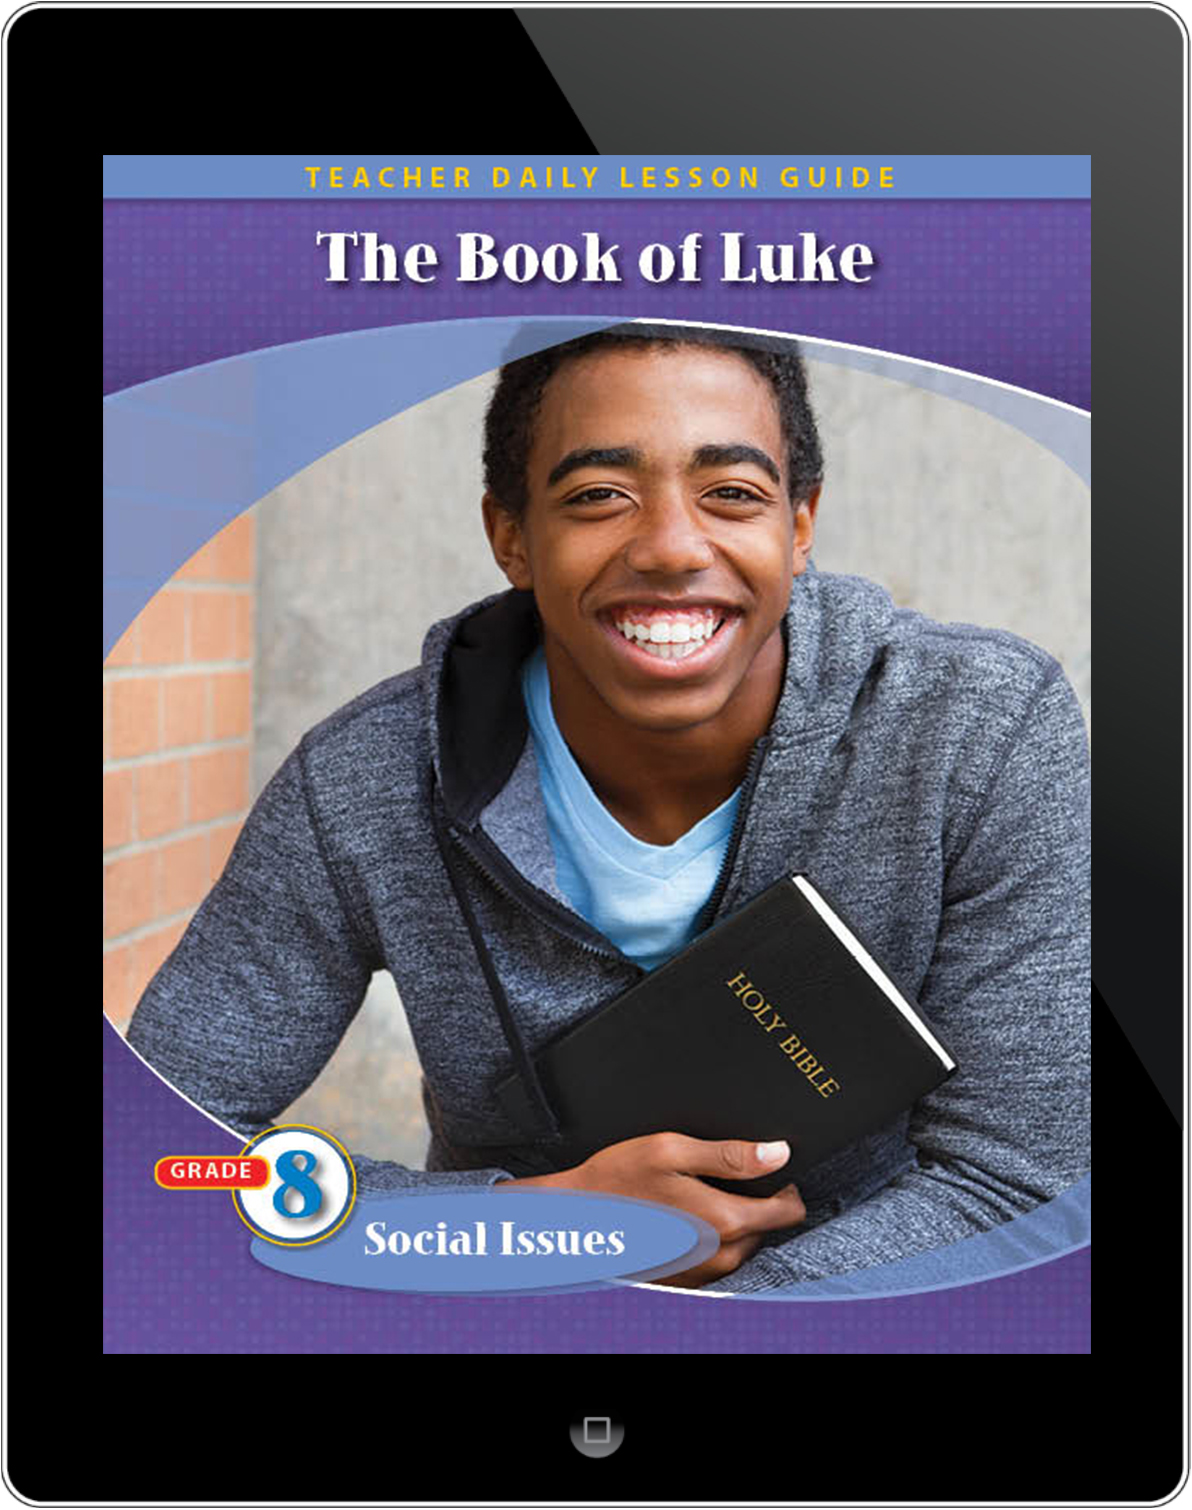 Pathways2.0 Grade 8 Social Issues Unit: The Book of Luke Daily Lesson Guide 5 Year License